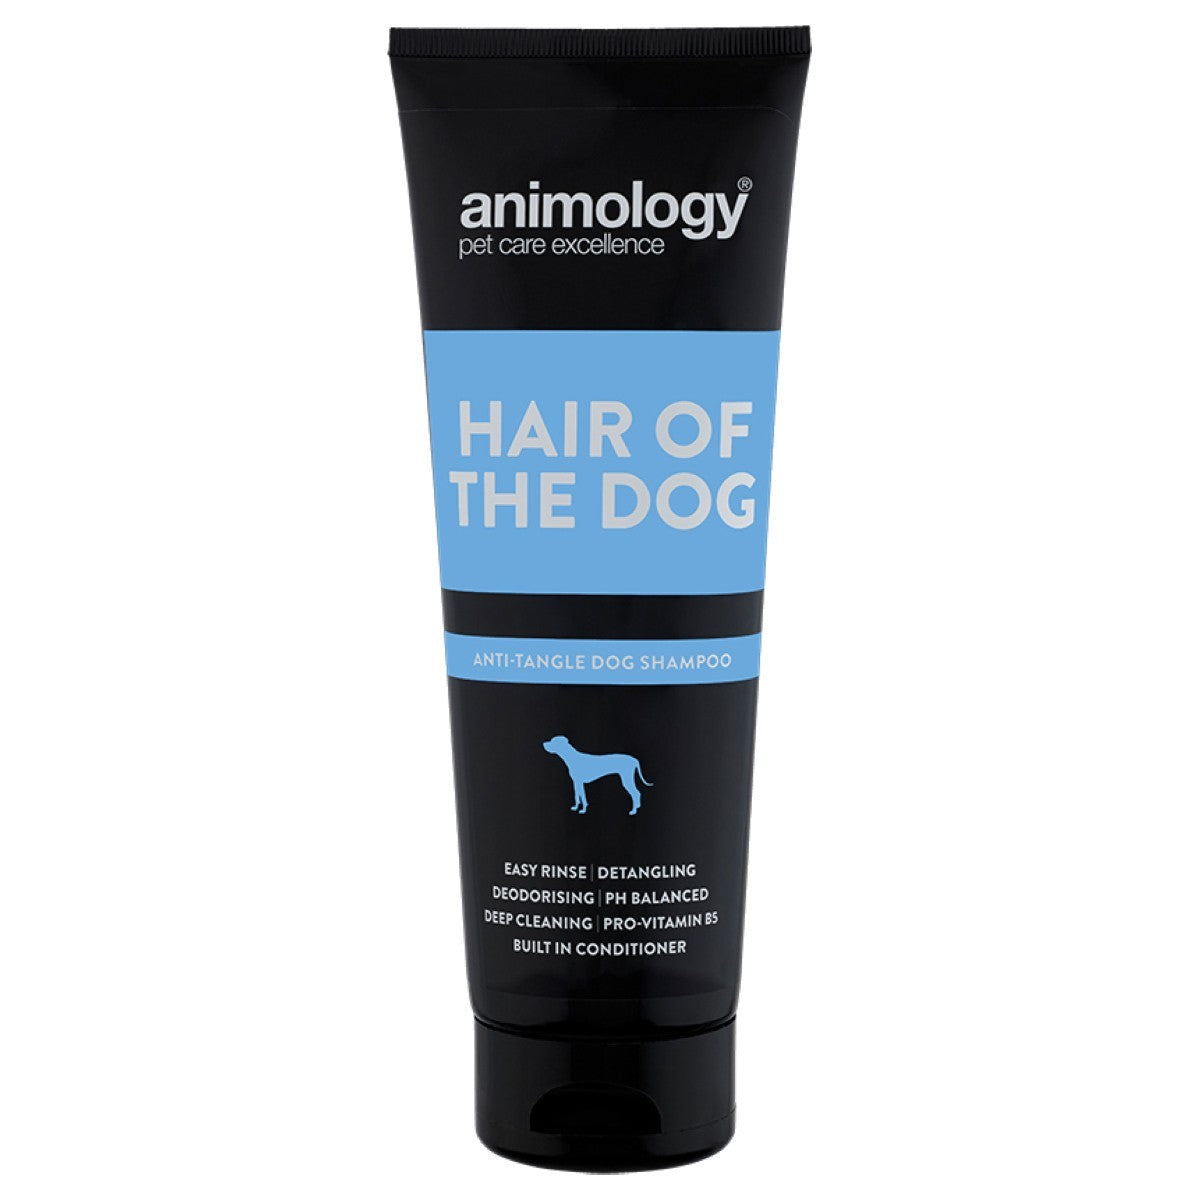 We have a full range of dog grooming accessories for your dog. Animology shampoos and grooming products. We also have George Barclay mutt mops and grooming mitts. 